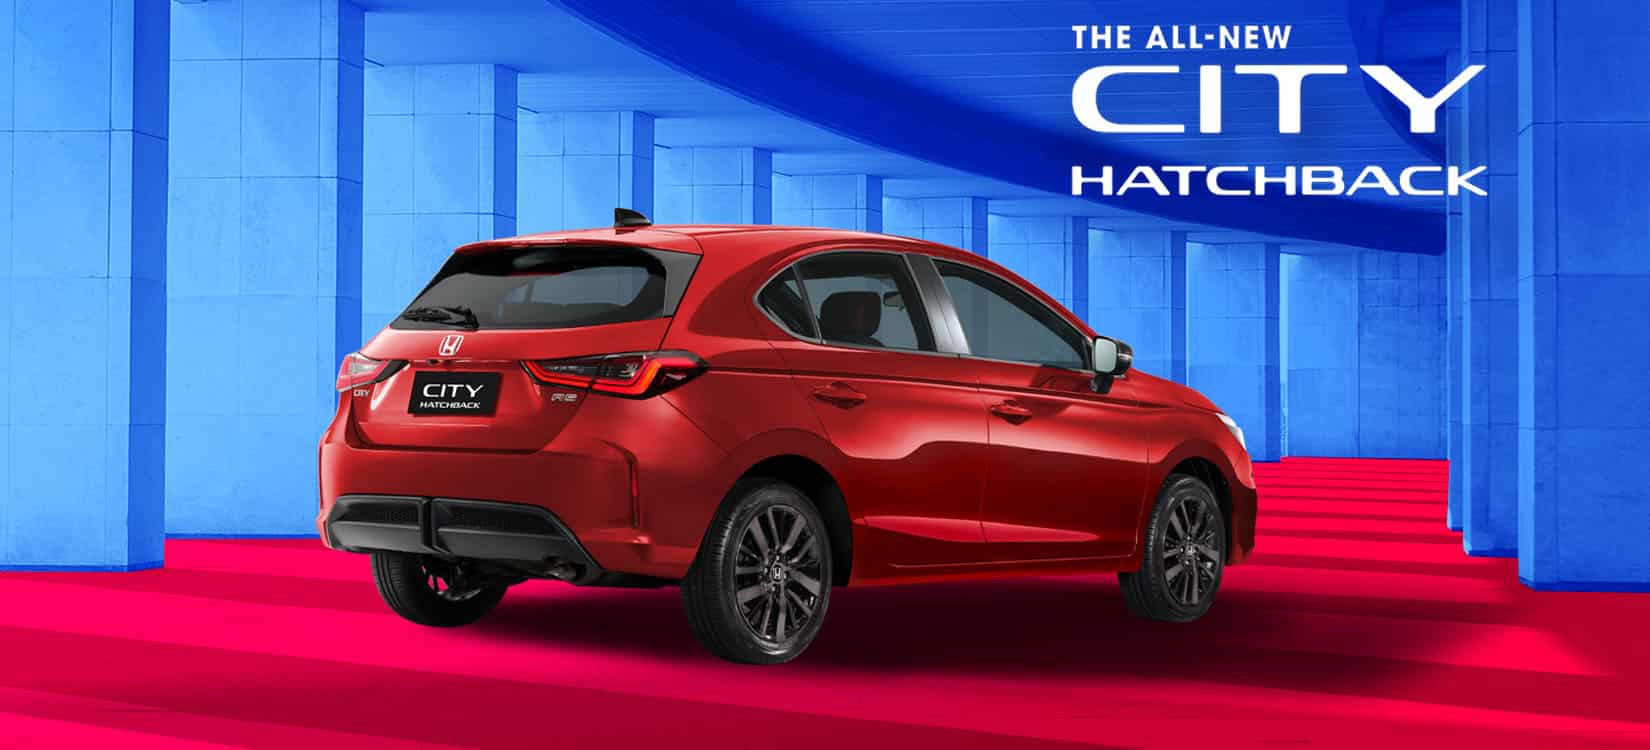 Honda officially launches the All-New Honda City Hatchback in the Philippines